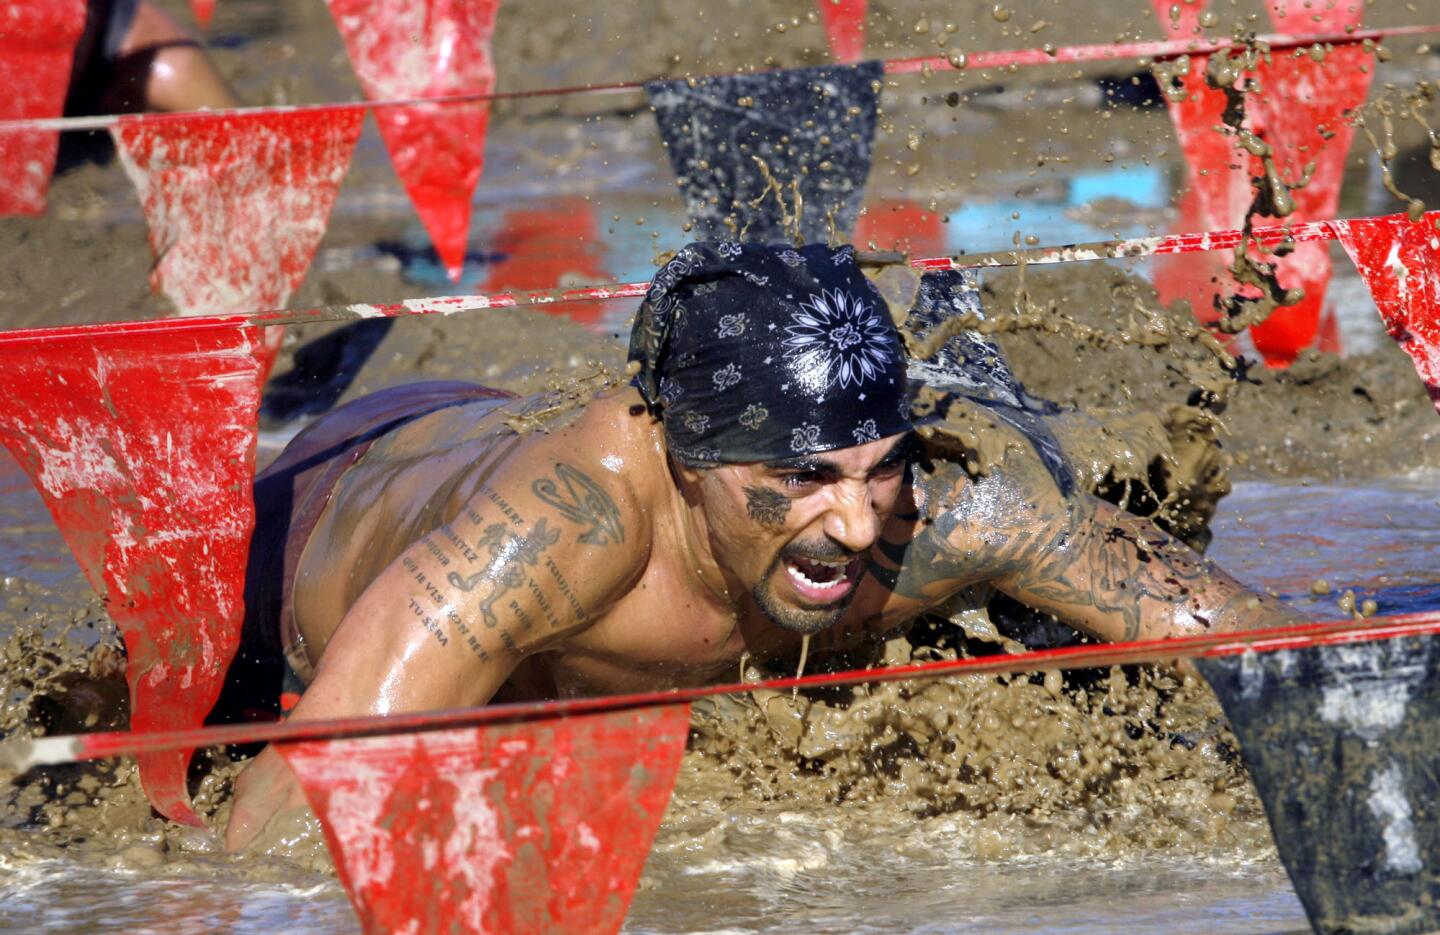 A participant crawls through the mud section of the Gladiator Rock 'n Run.